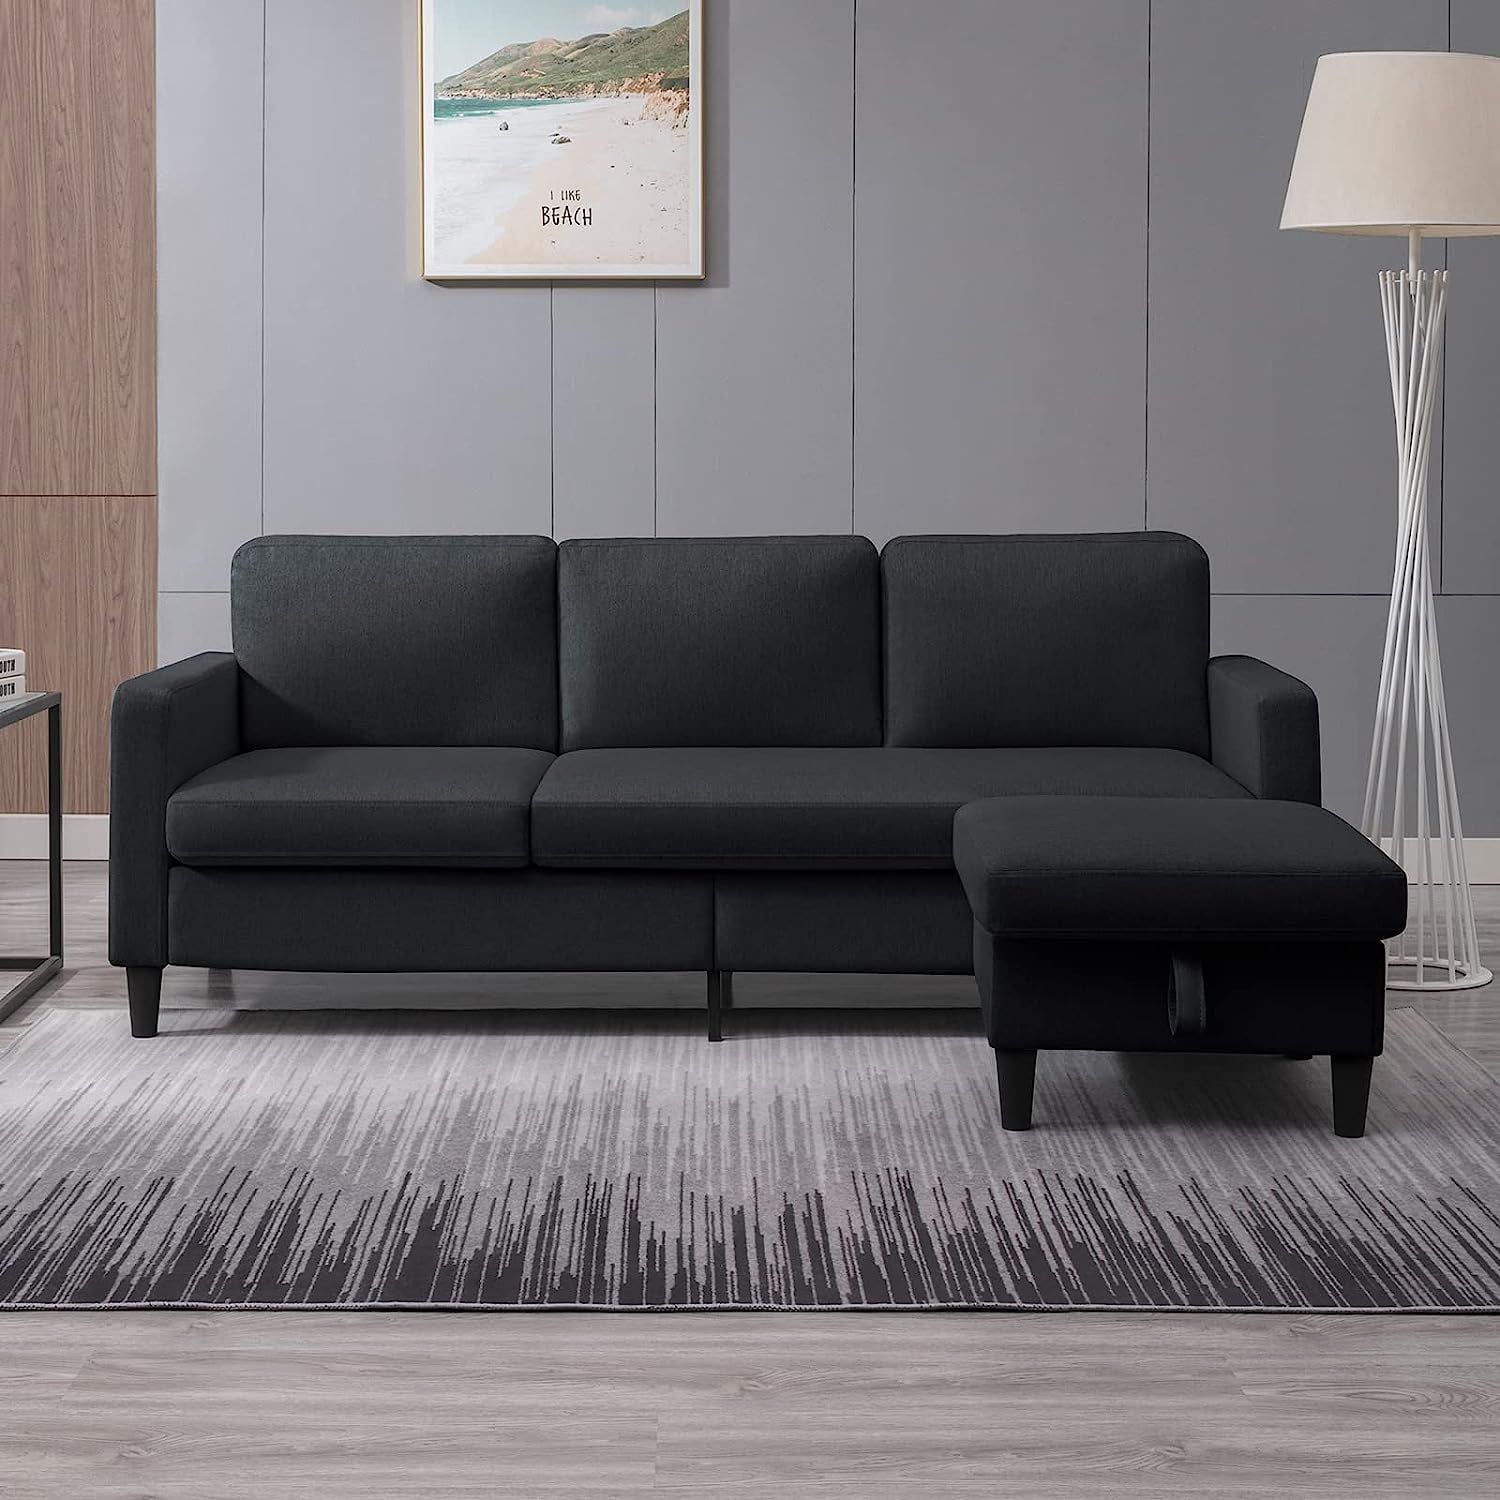 Mjkone 76" W Convertible Sectional Sofa Couch With Storage Ottoman,  L Shaped Couch, 3 Seat Sofas With Reversible Chaise, Sectional Couches For  Living Room/Office/Bedroom (Dark Grey) – Walmart Inside 3 Seat Sofa Sectionals With Reversible Chaise (Photo 13 of 15)